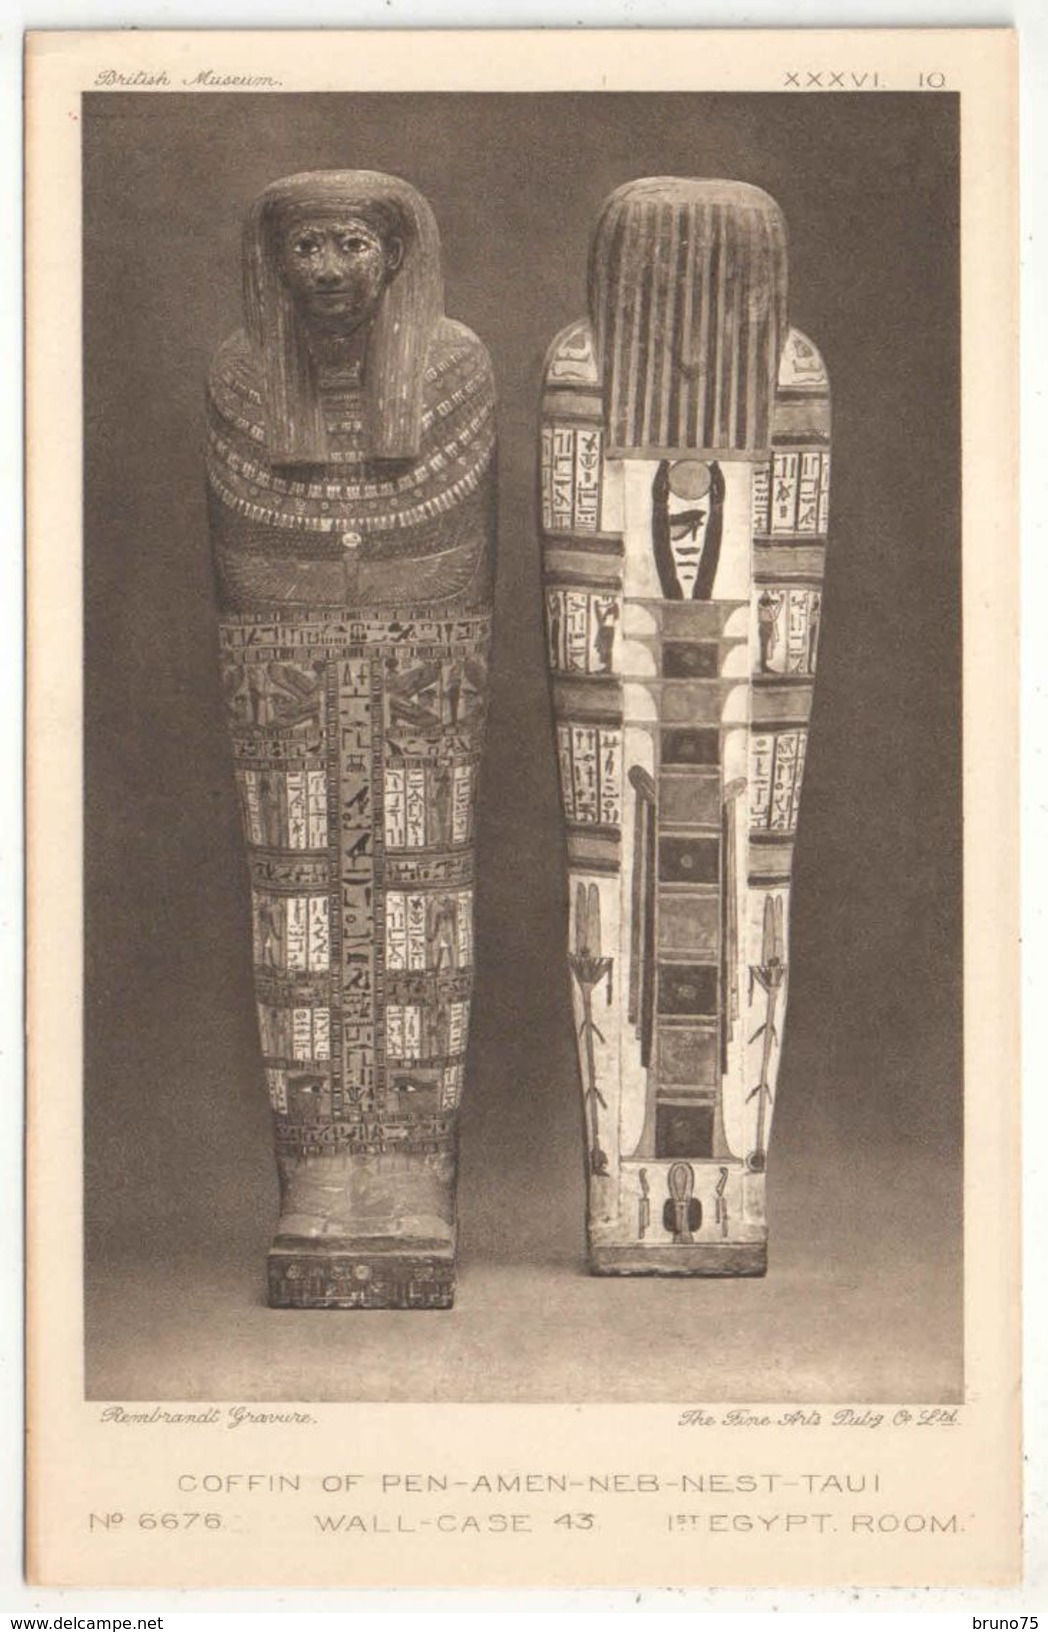 Coffin Of Pen-Amen-Neb-Nest-Taui - N°6676 - Wall-Case 43 - 1st Egypt Room - British Museum - Museos